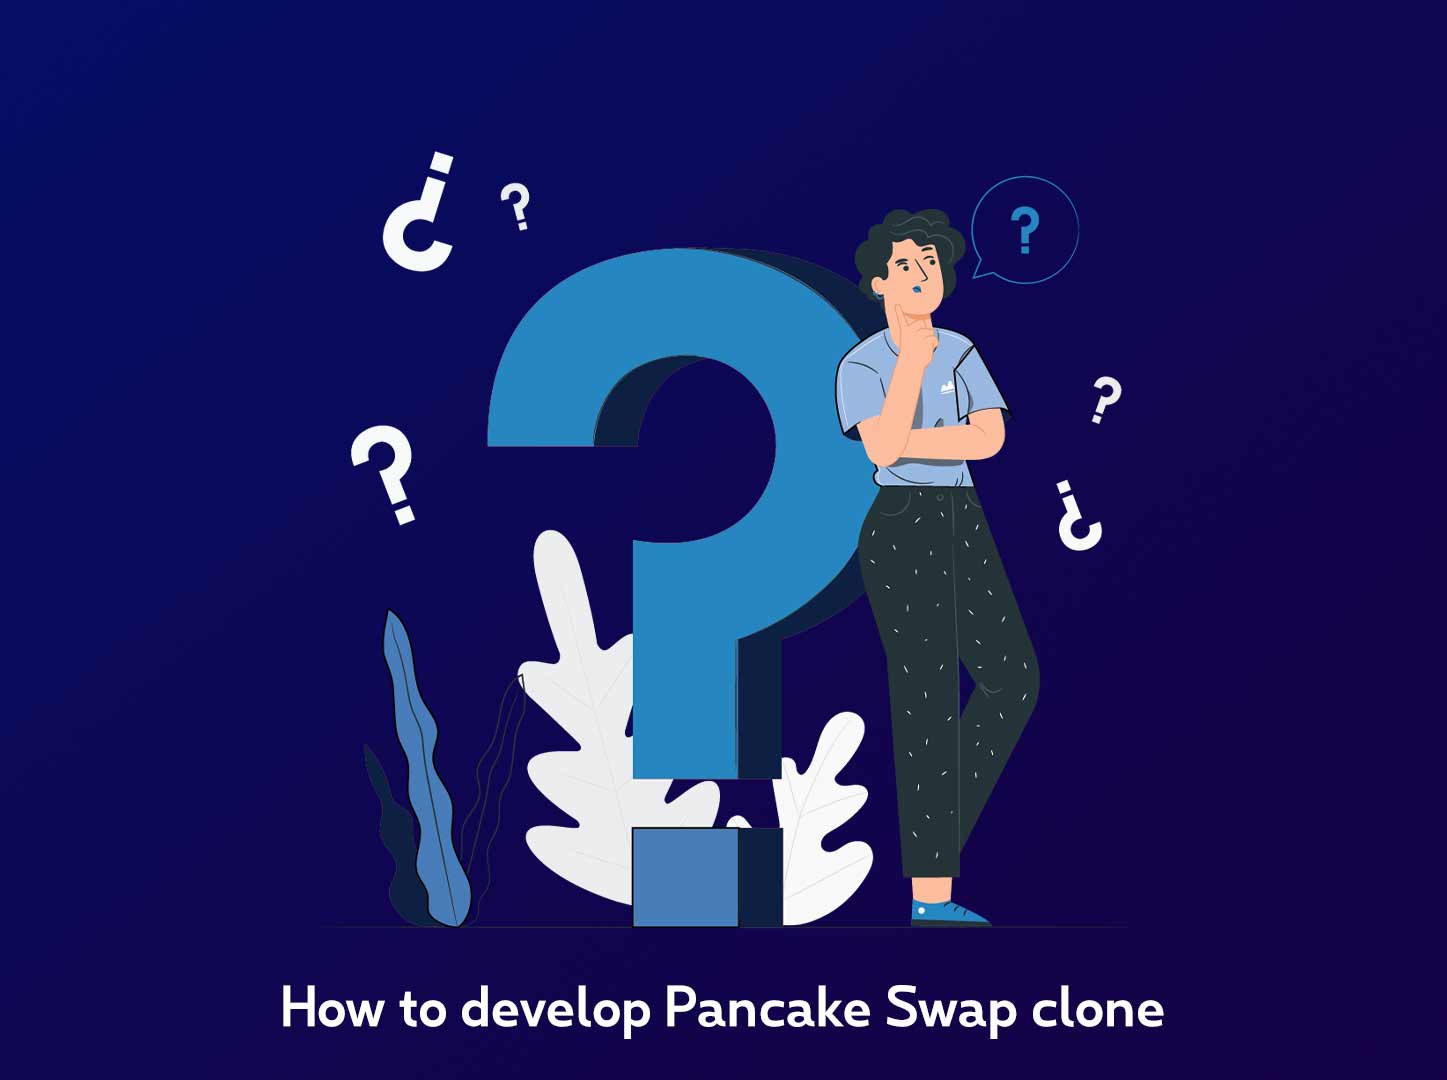 How to develop a pancake swap clone